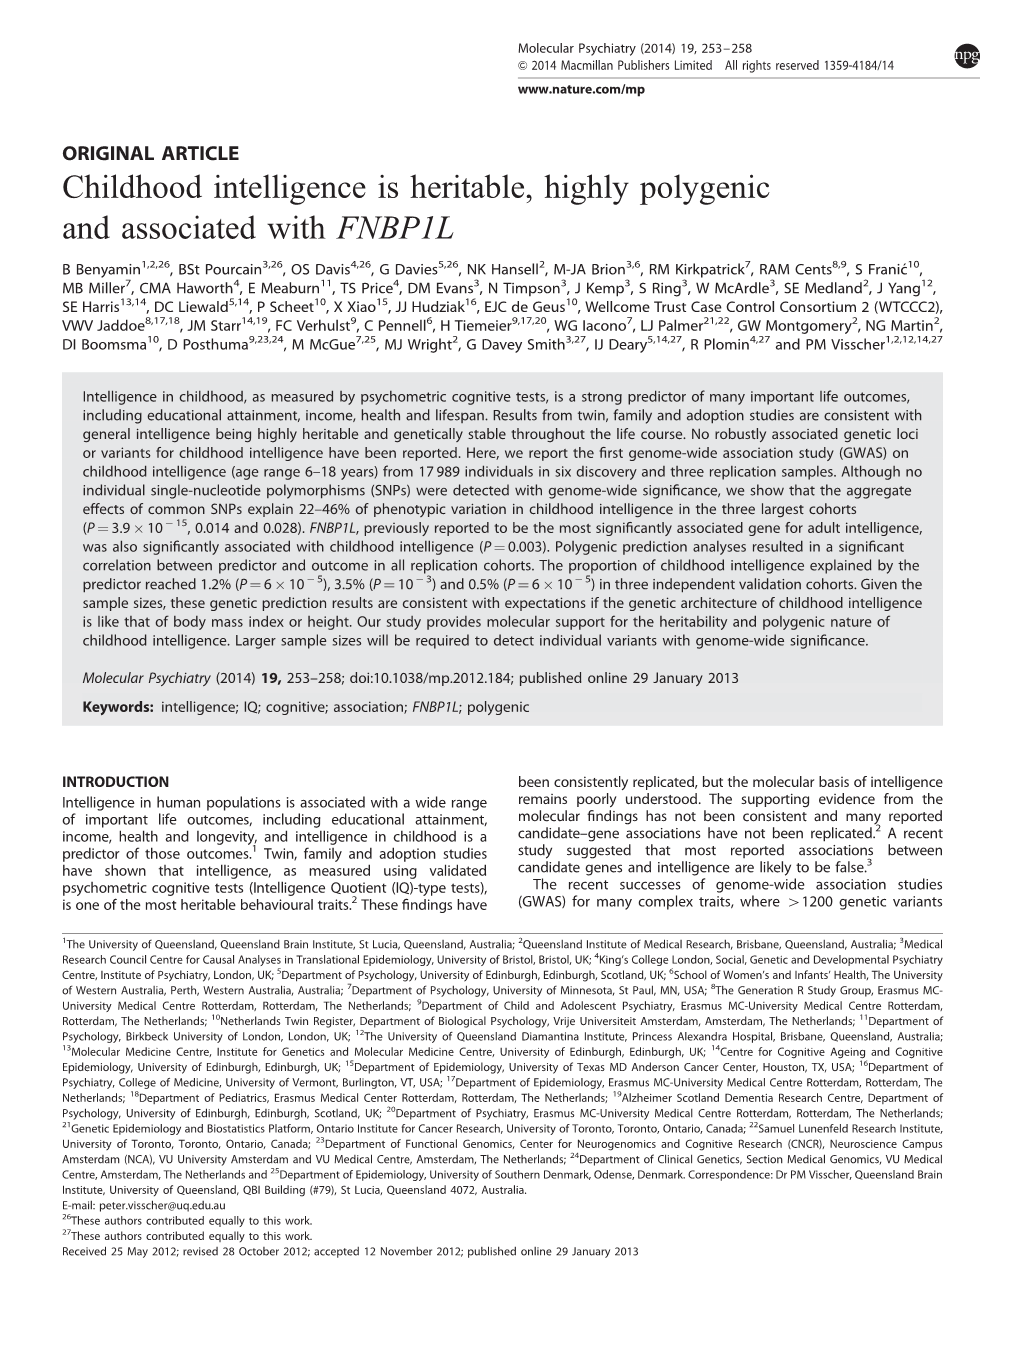 Childhood Intelligence Is Heritable, Highly Polygenic and Associated with FNBP1L